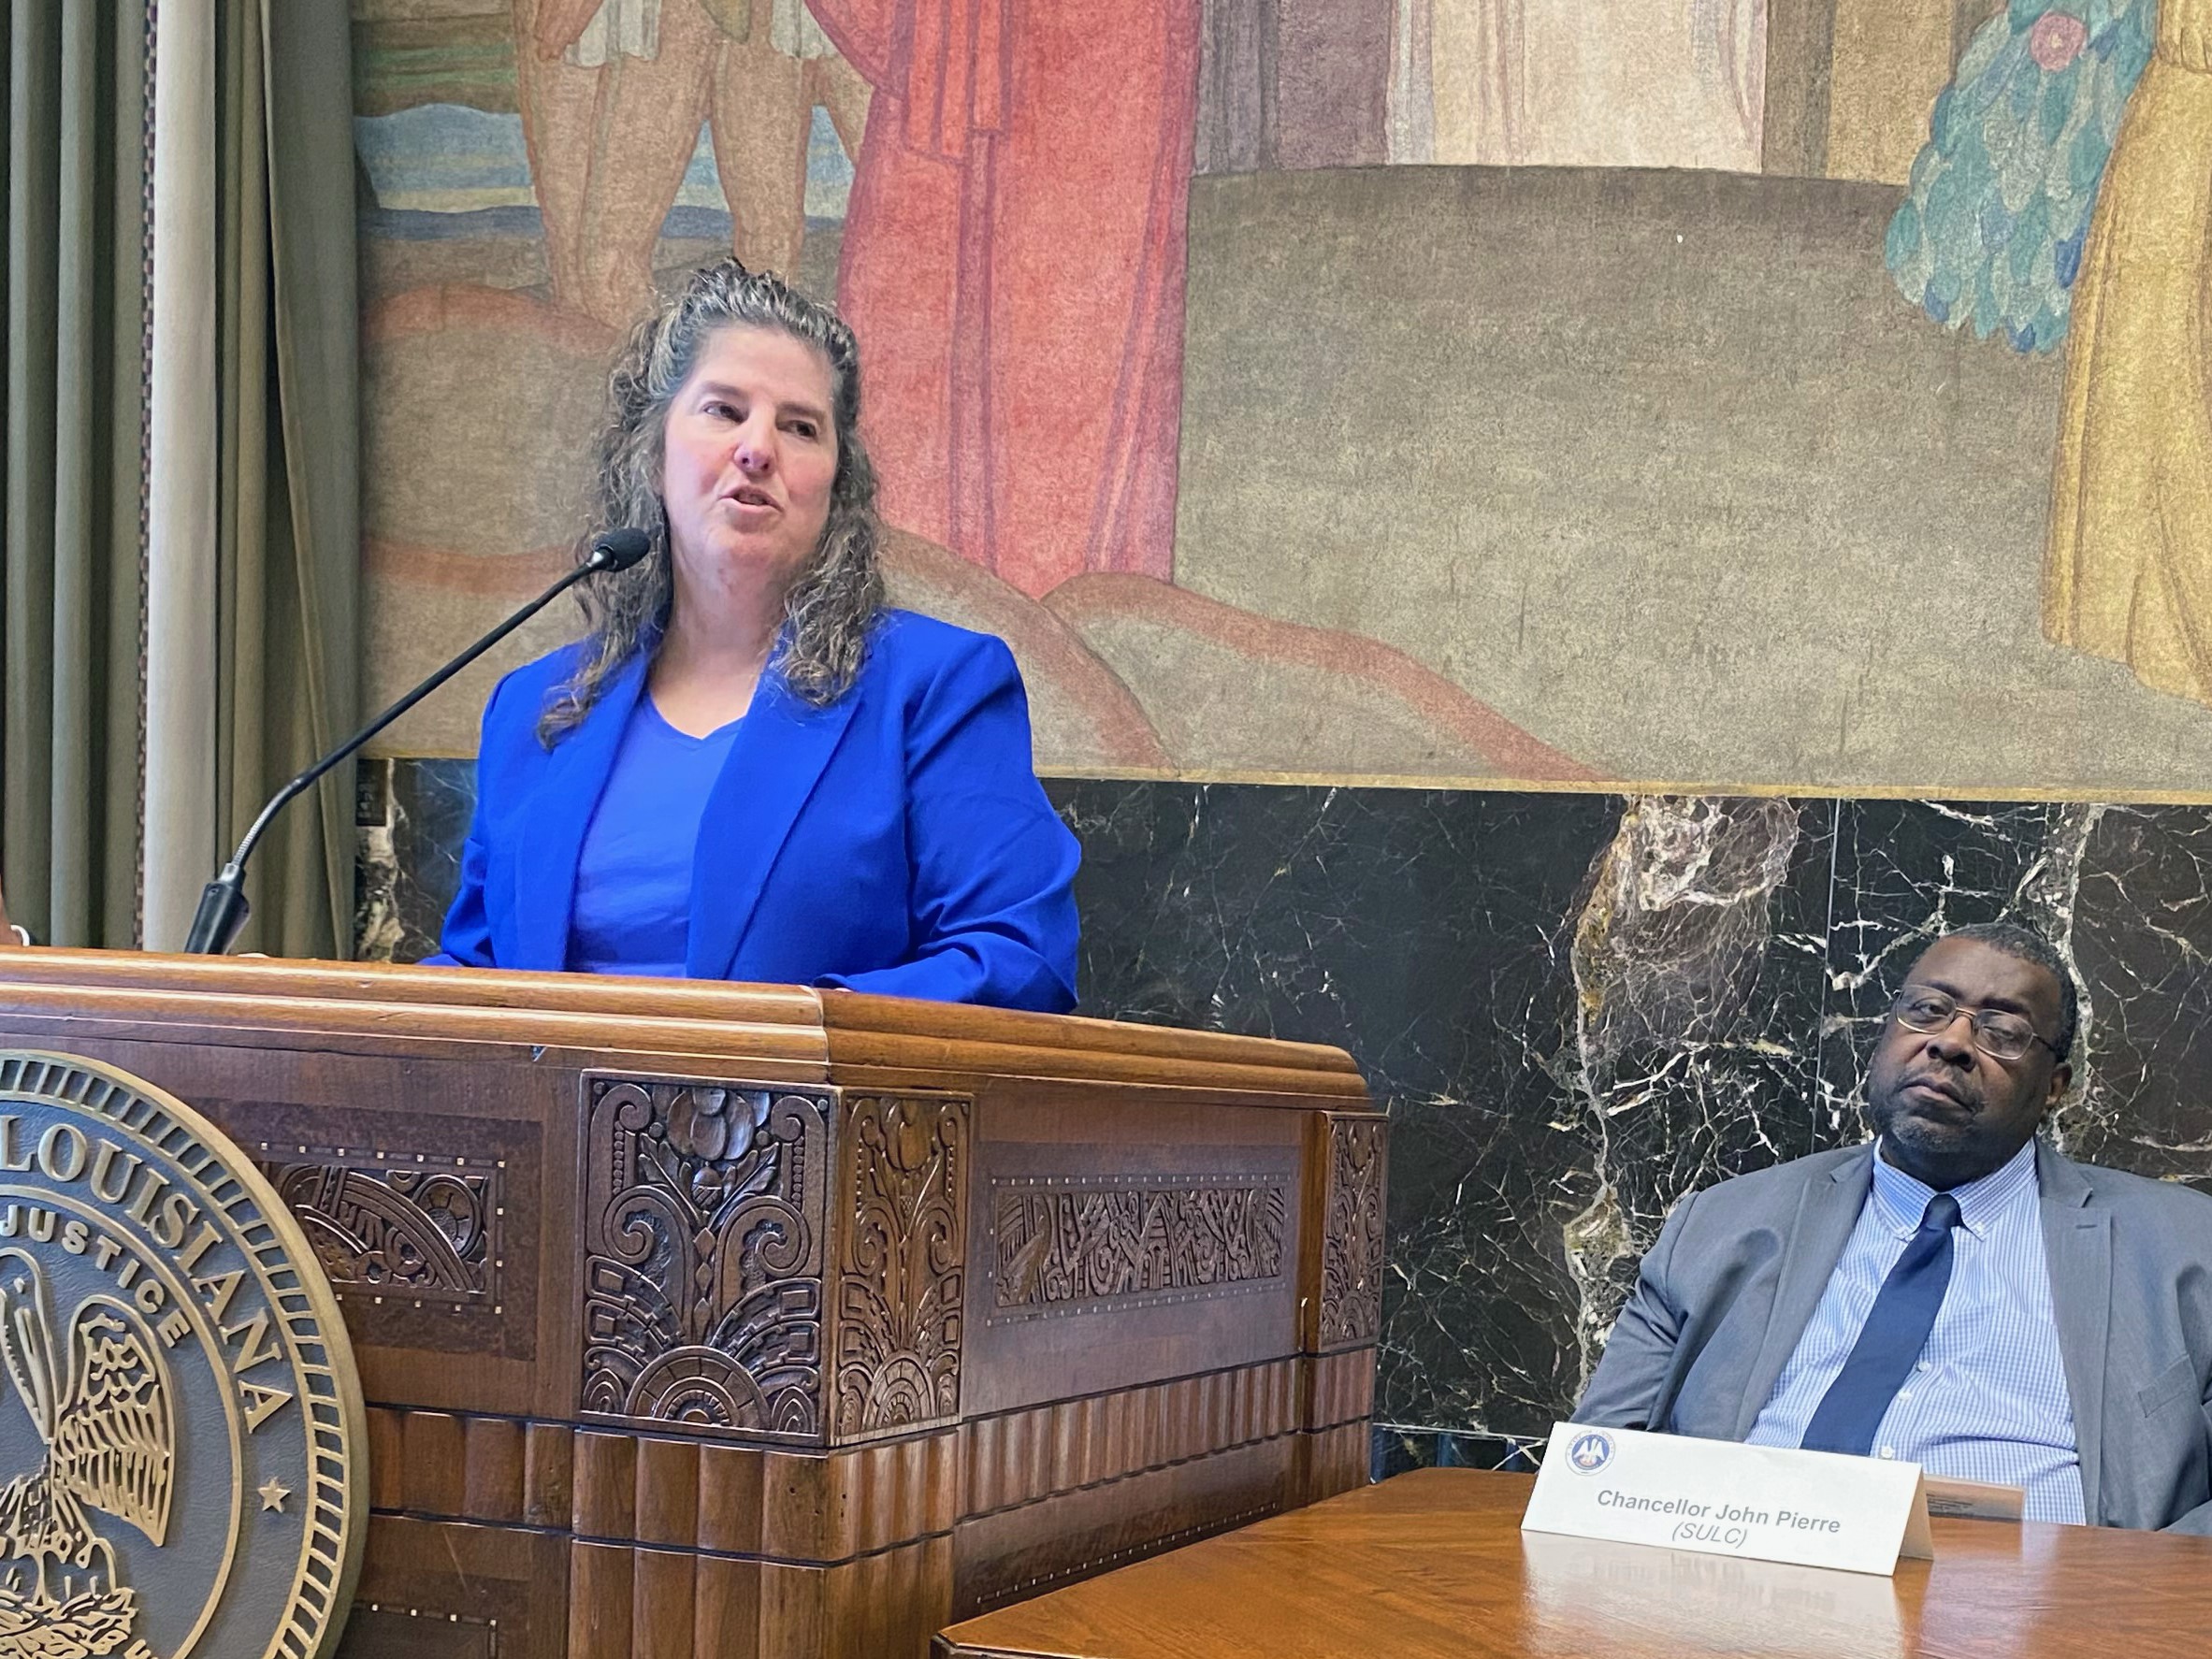 Administrator Liz Ryan’s Visit to Baton Rouge to Announce Office of Juvenile Justice and Delinquency Prevention Grant to Southern University Law Center